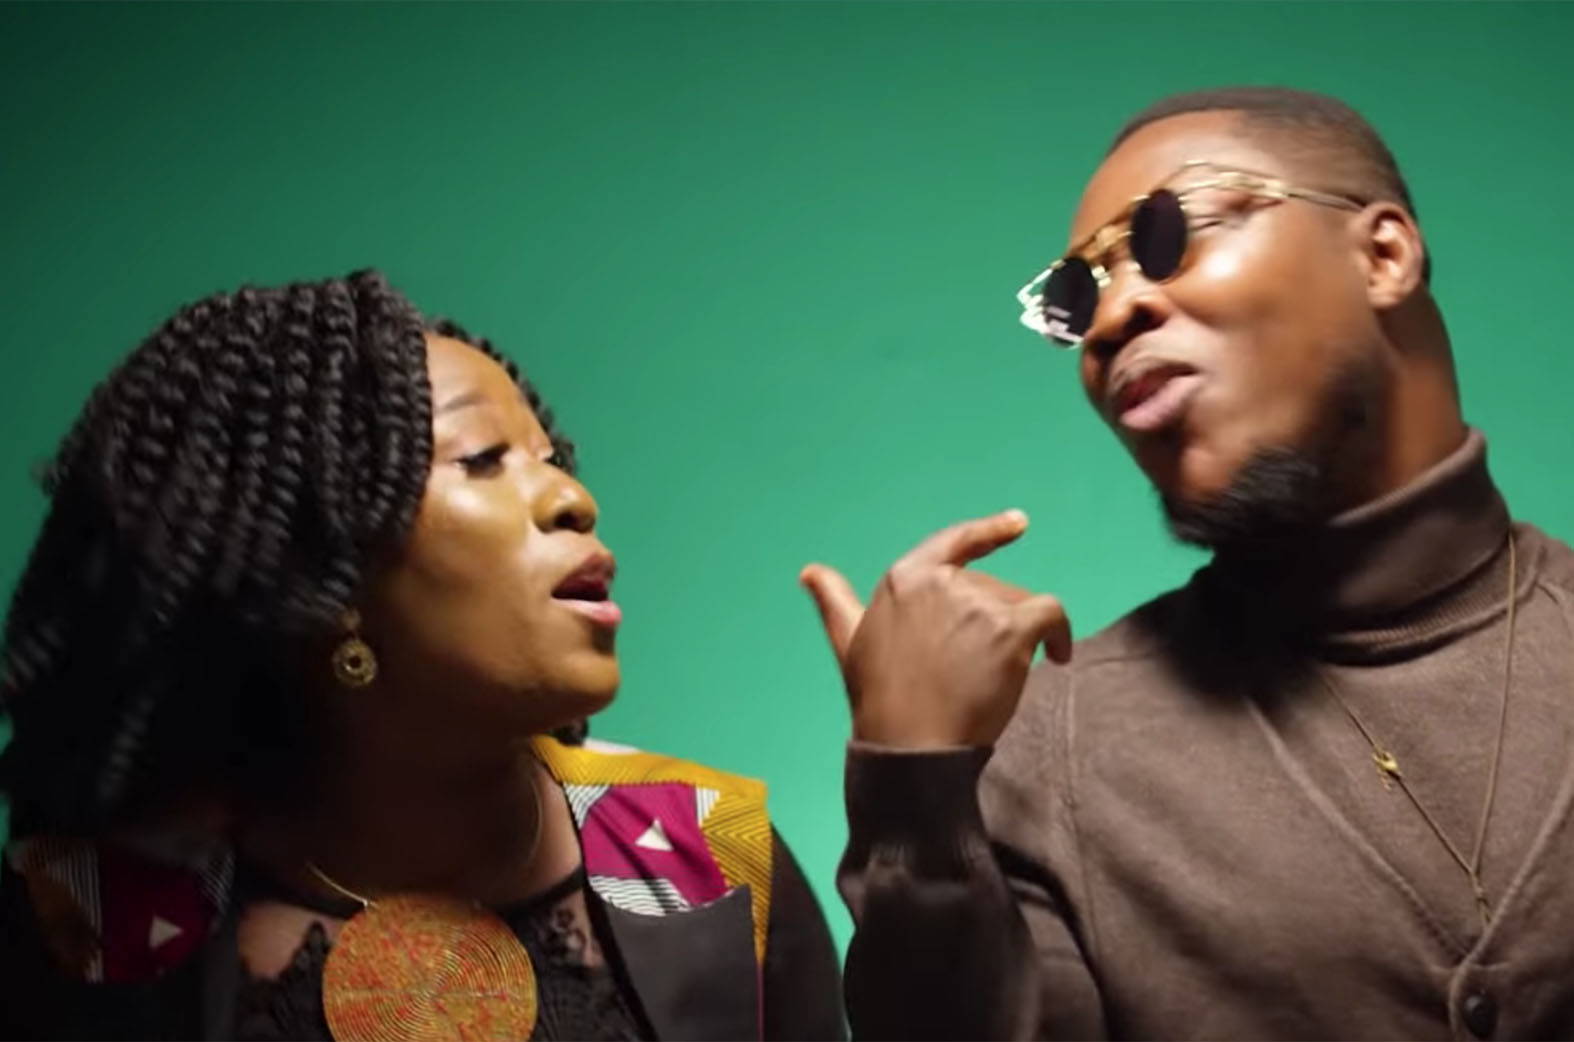 Video: Note From God by Boadiwaa feat. Akesse Brempong